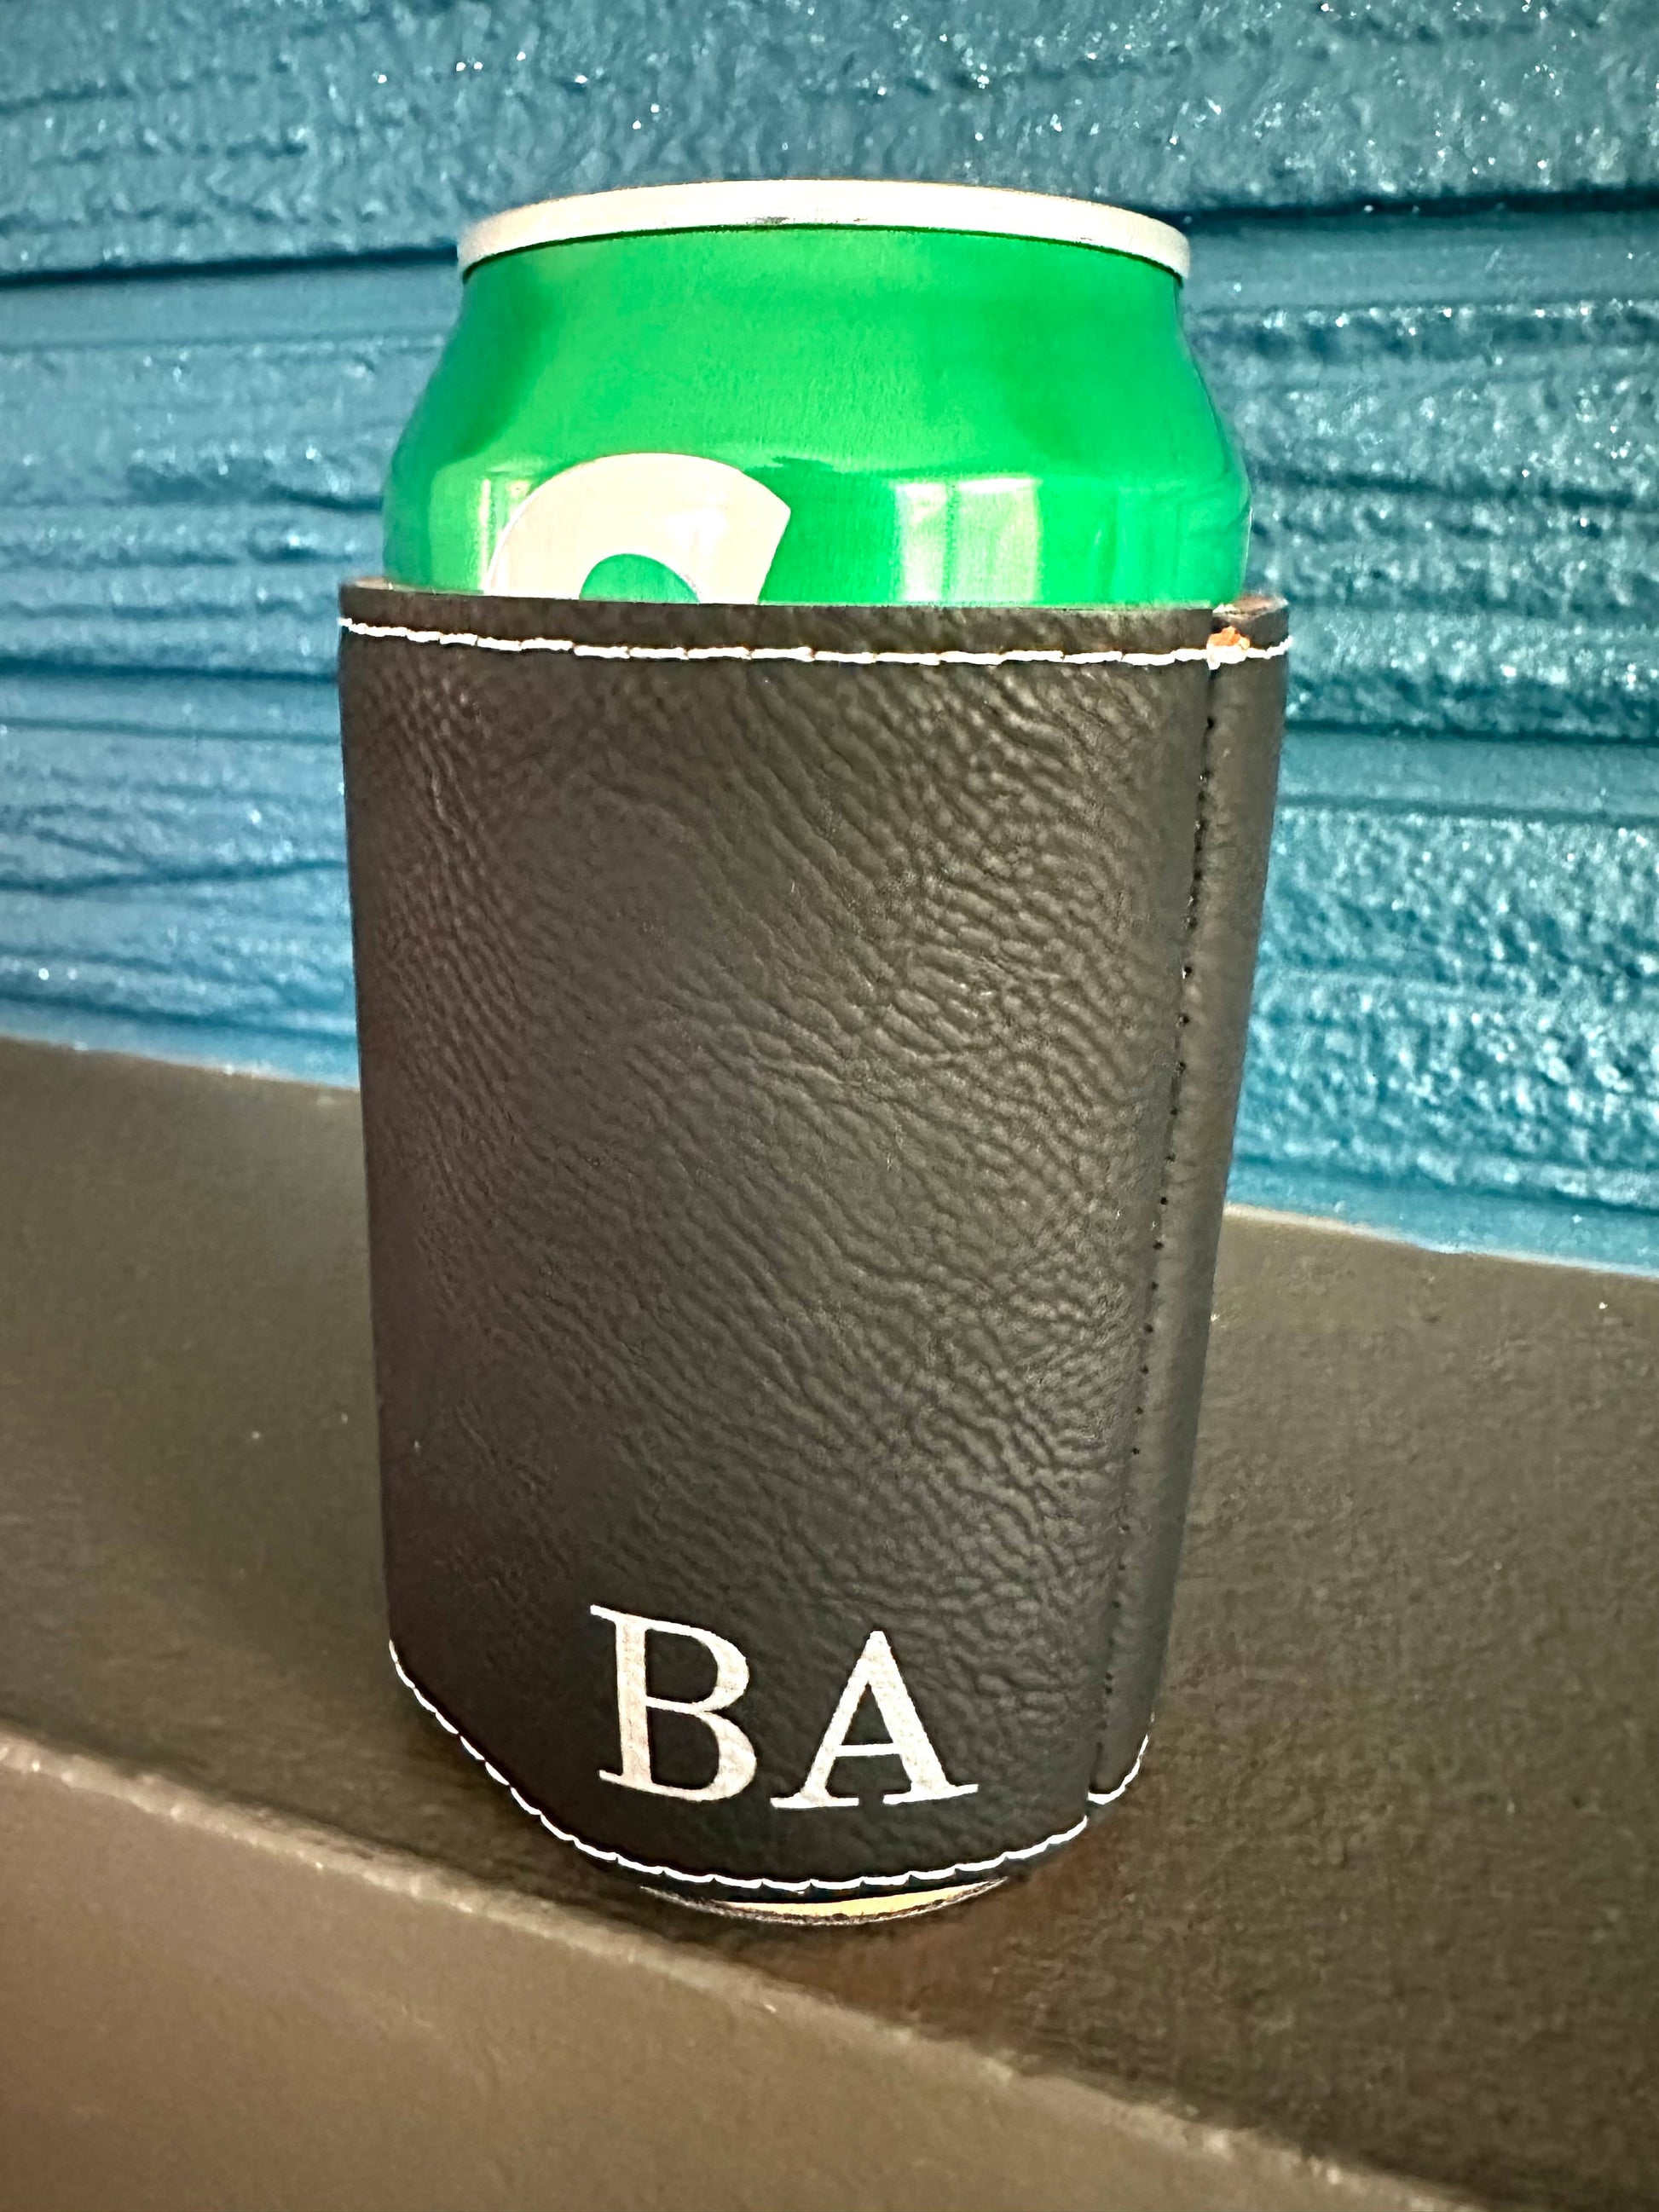 Personalized Can Coolers & Custom Koozies for Every Occasion